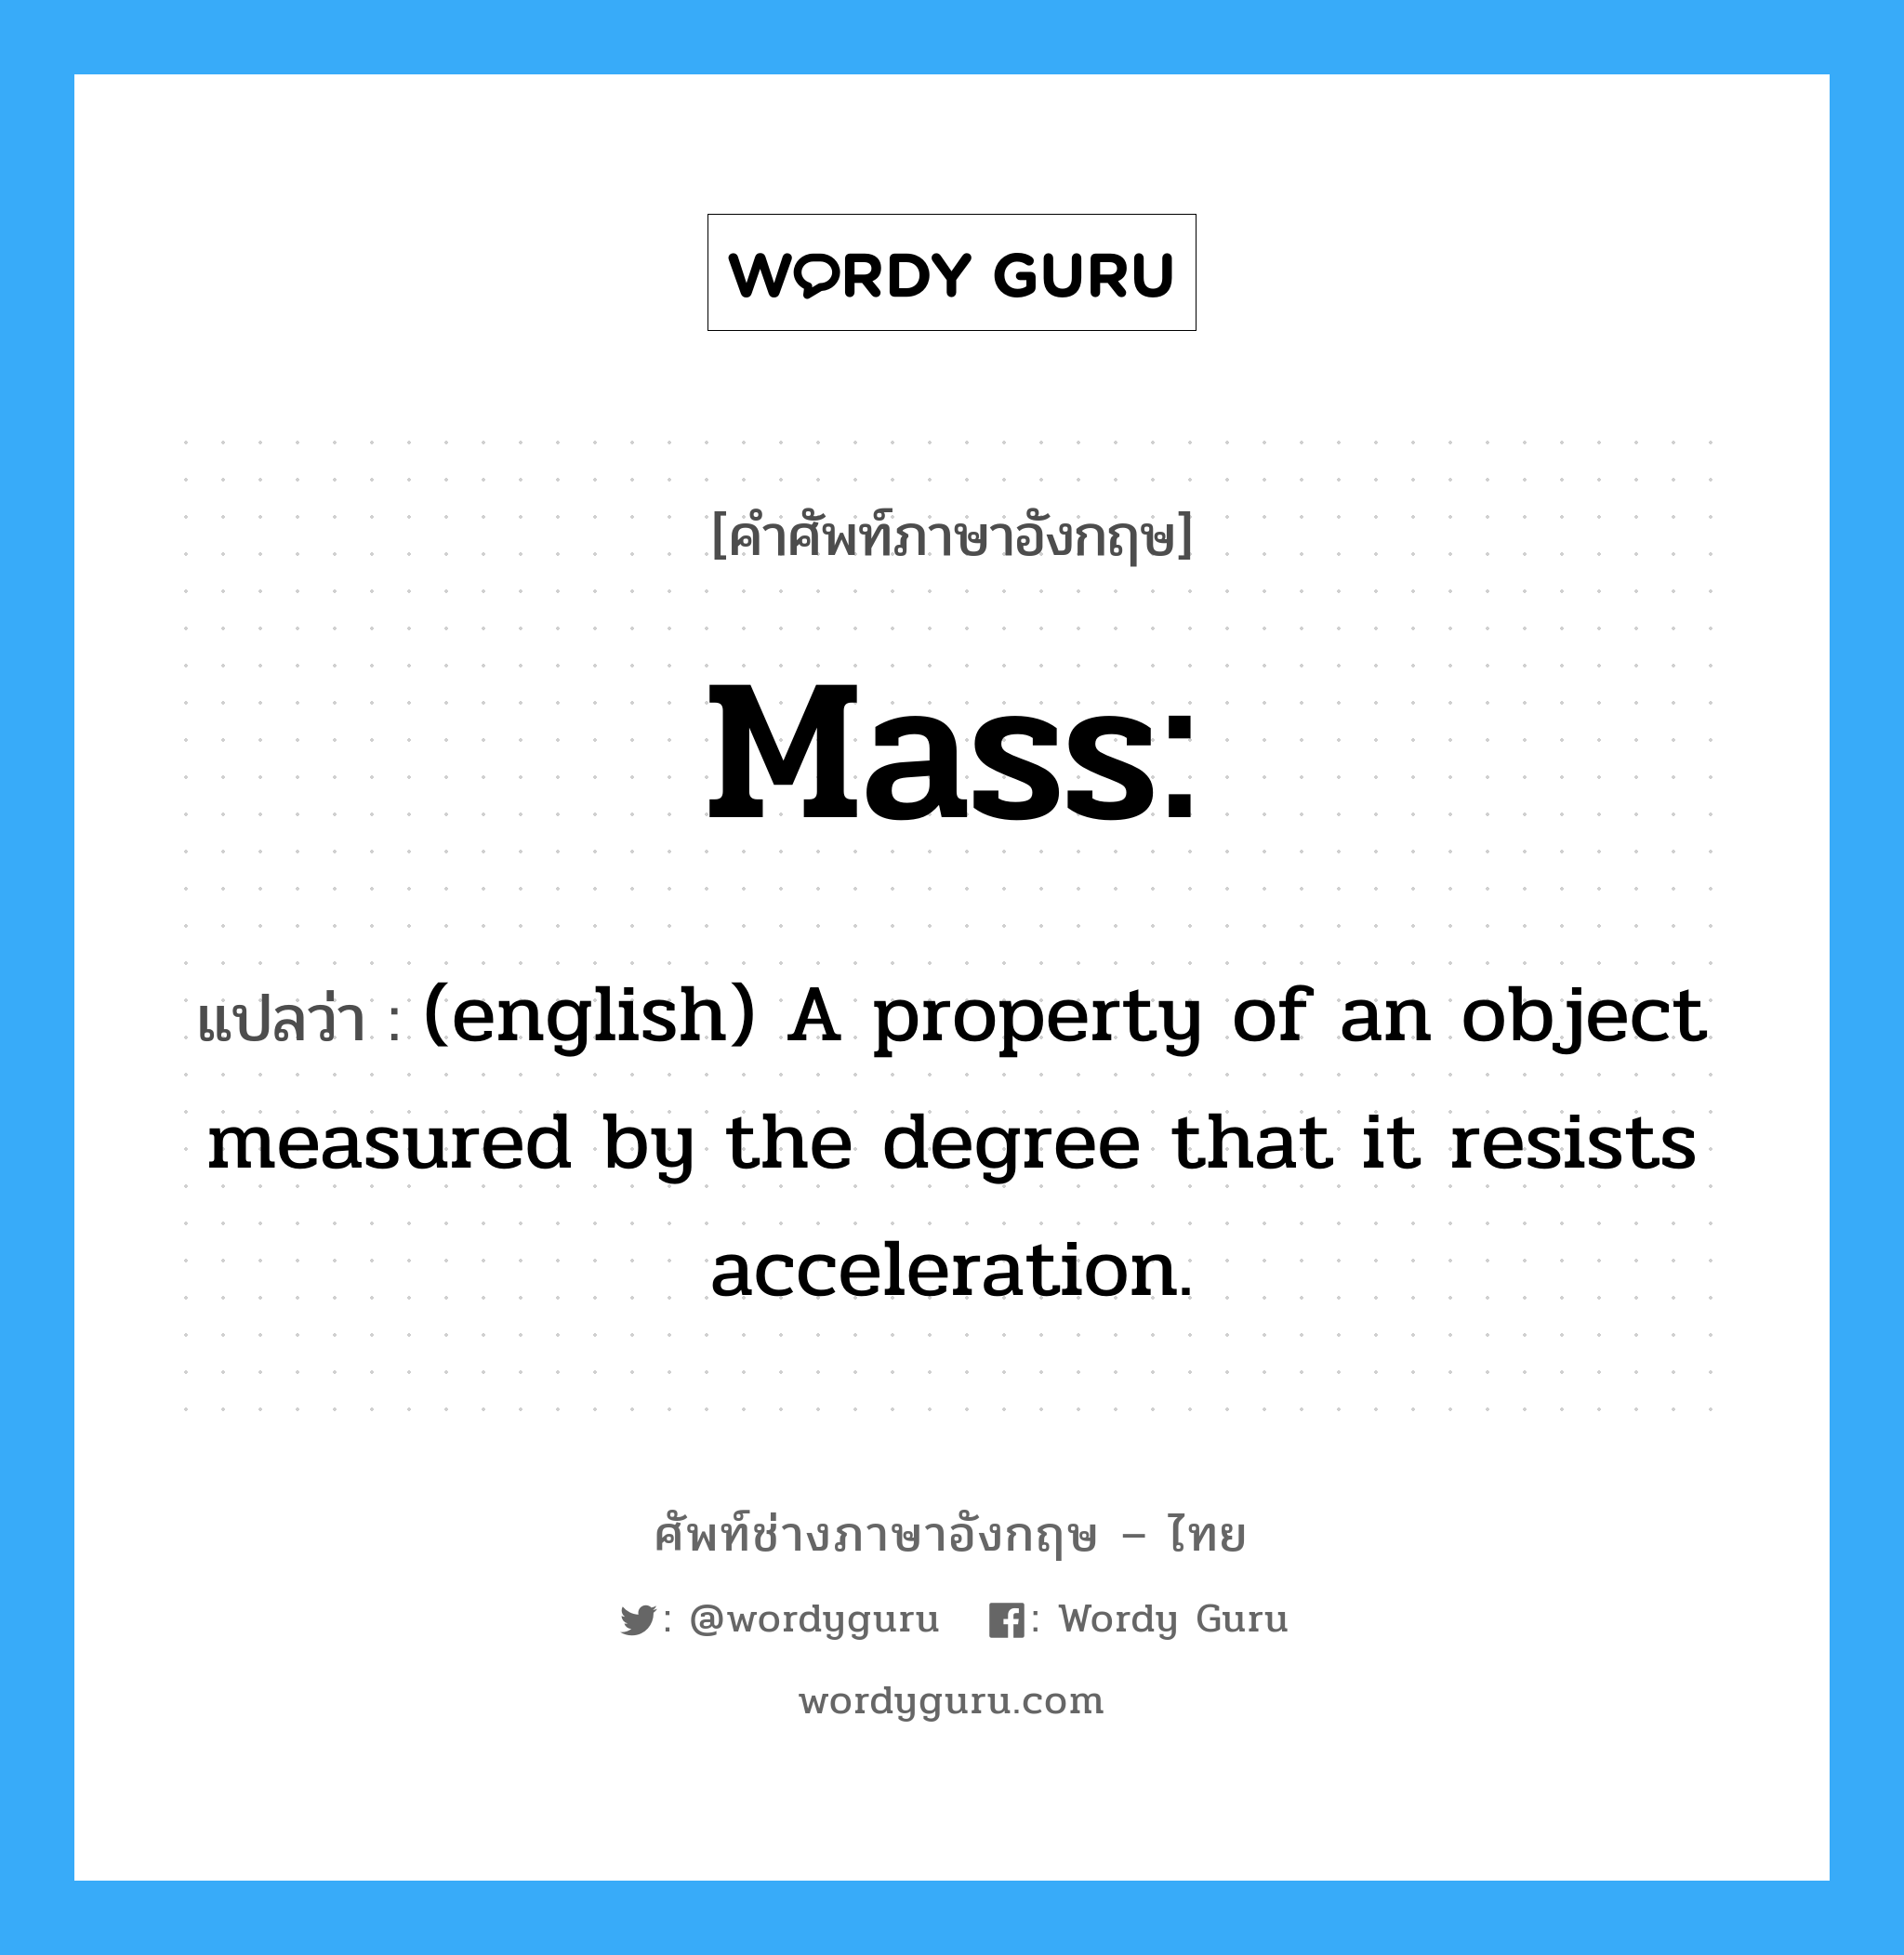 Mass: แปลว่า?, คำศัพท์ช่างภาษาอังกฤษ - ไทย Mass: คำศัพท์ภาษาอังกฤษ Mass: แปลว่า (english) A property of an object measured by the degree that it resists acceleration.